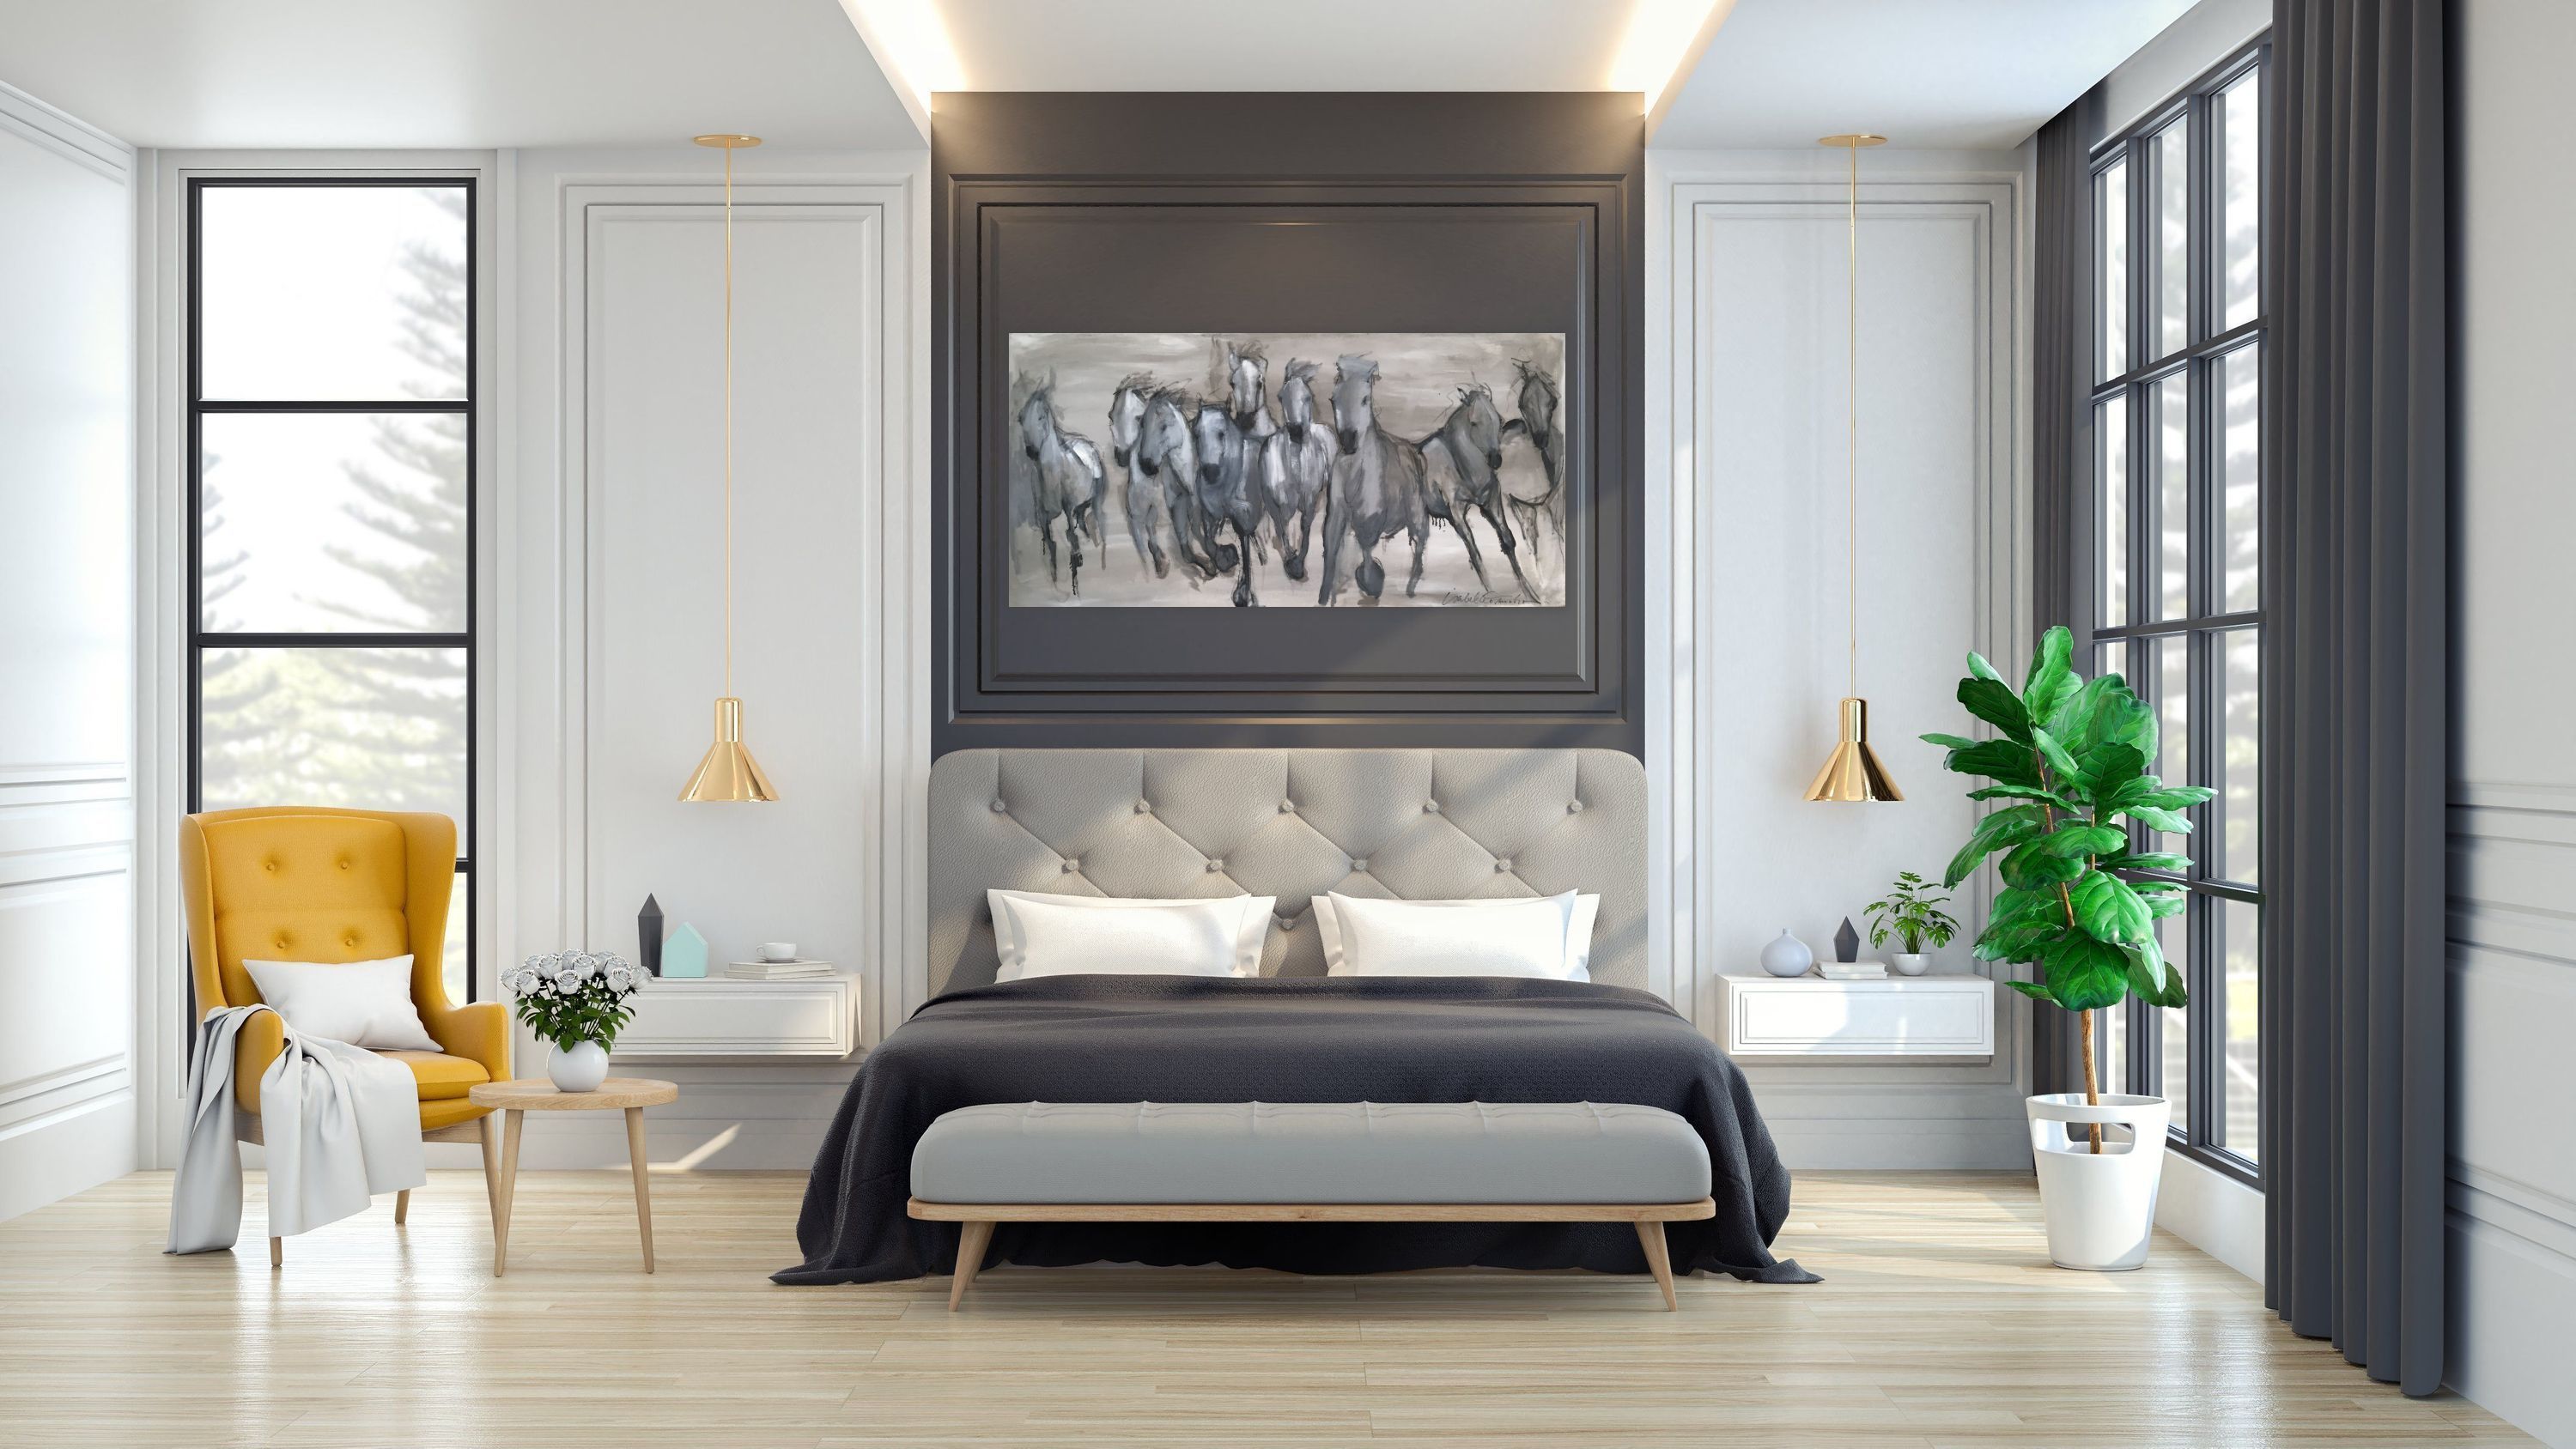 Energetic horse herd from the Camargue region of France in subtle neutrals in cool and warm tones of gray. A showpiece for any wall in your home or office.